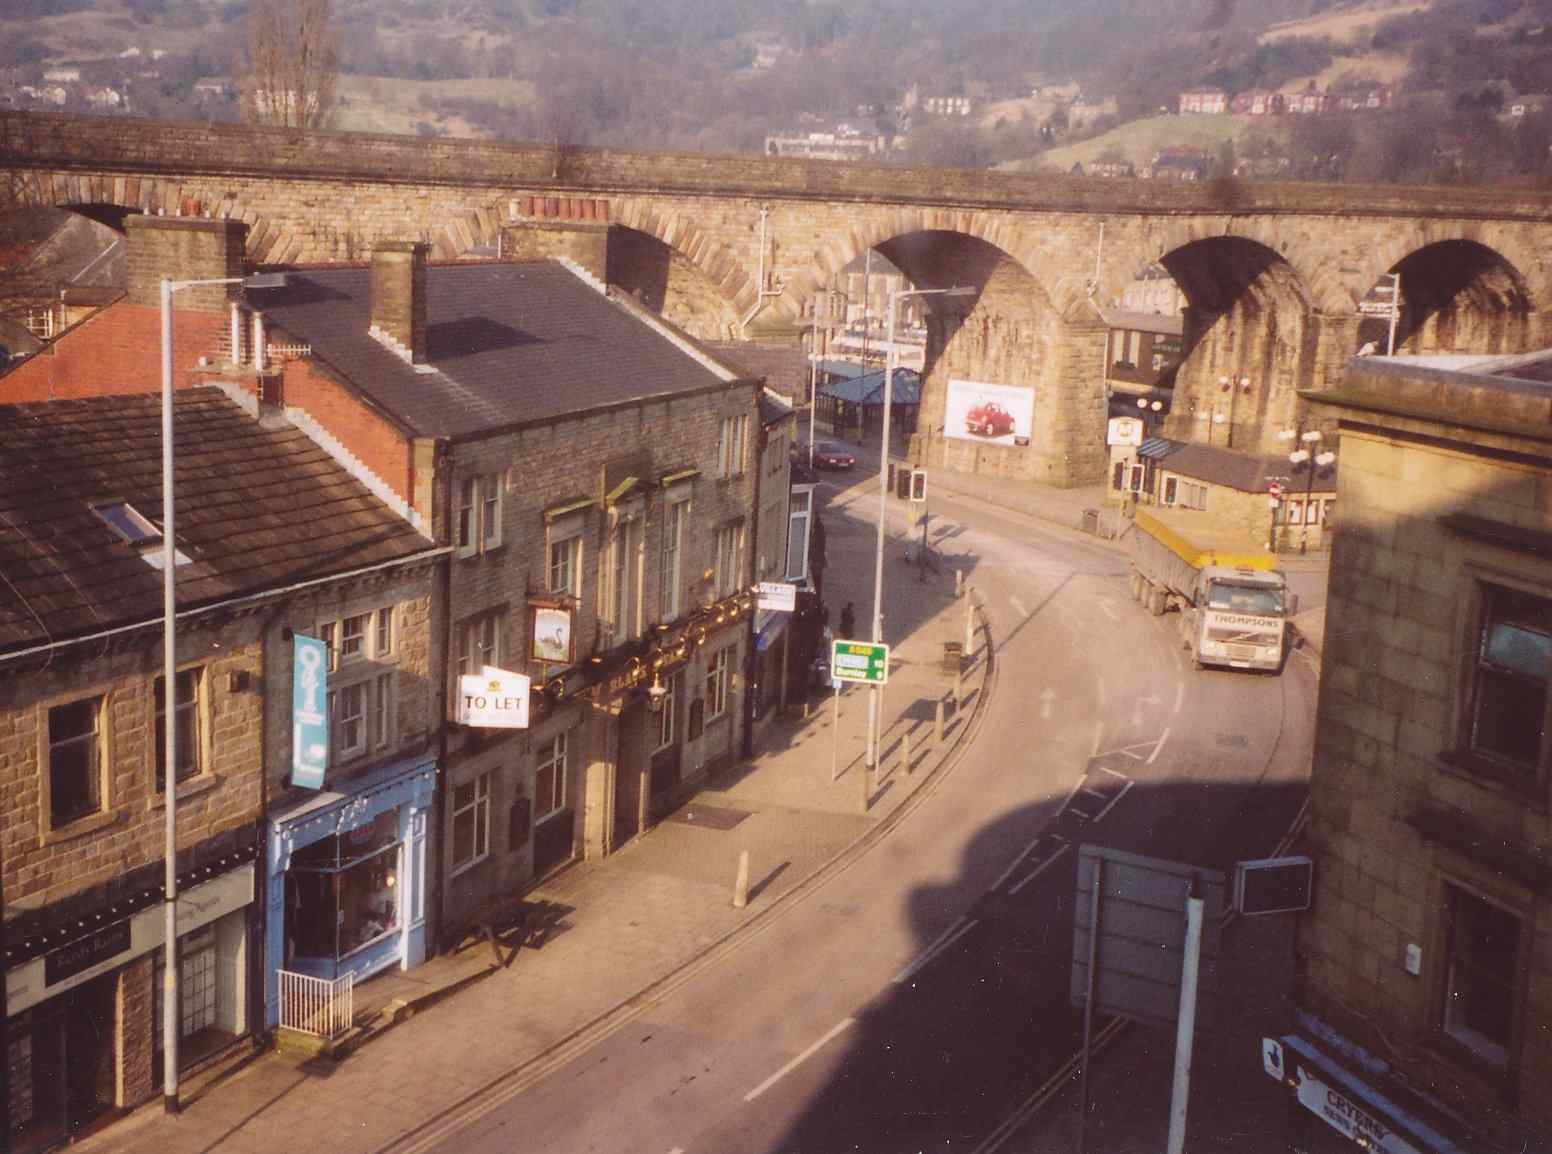 Photo of Burnley Road shops and the 'Black Swan' pub taken from the attic of the Town Hall c. 2008 showing railway viaduct.